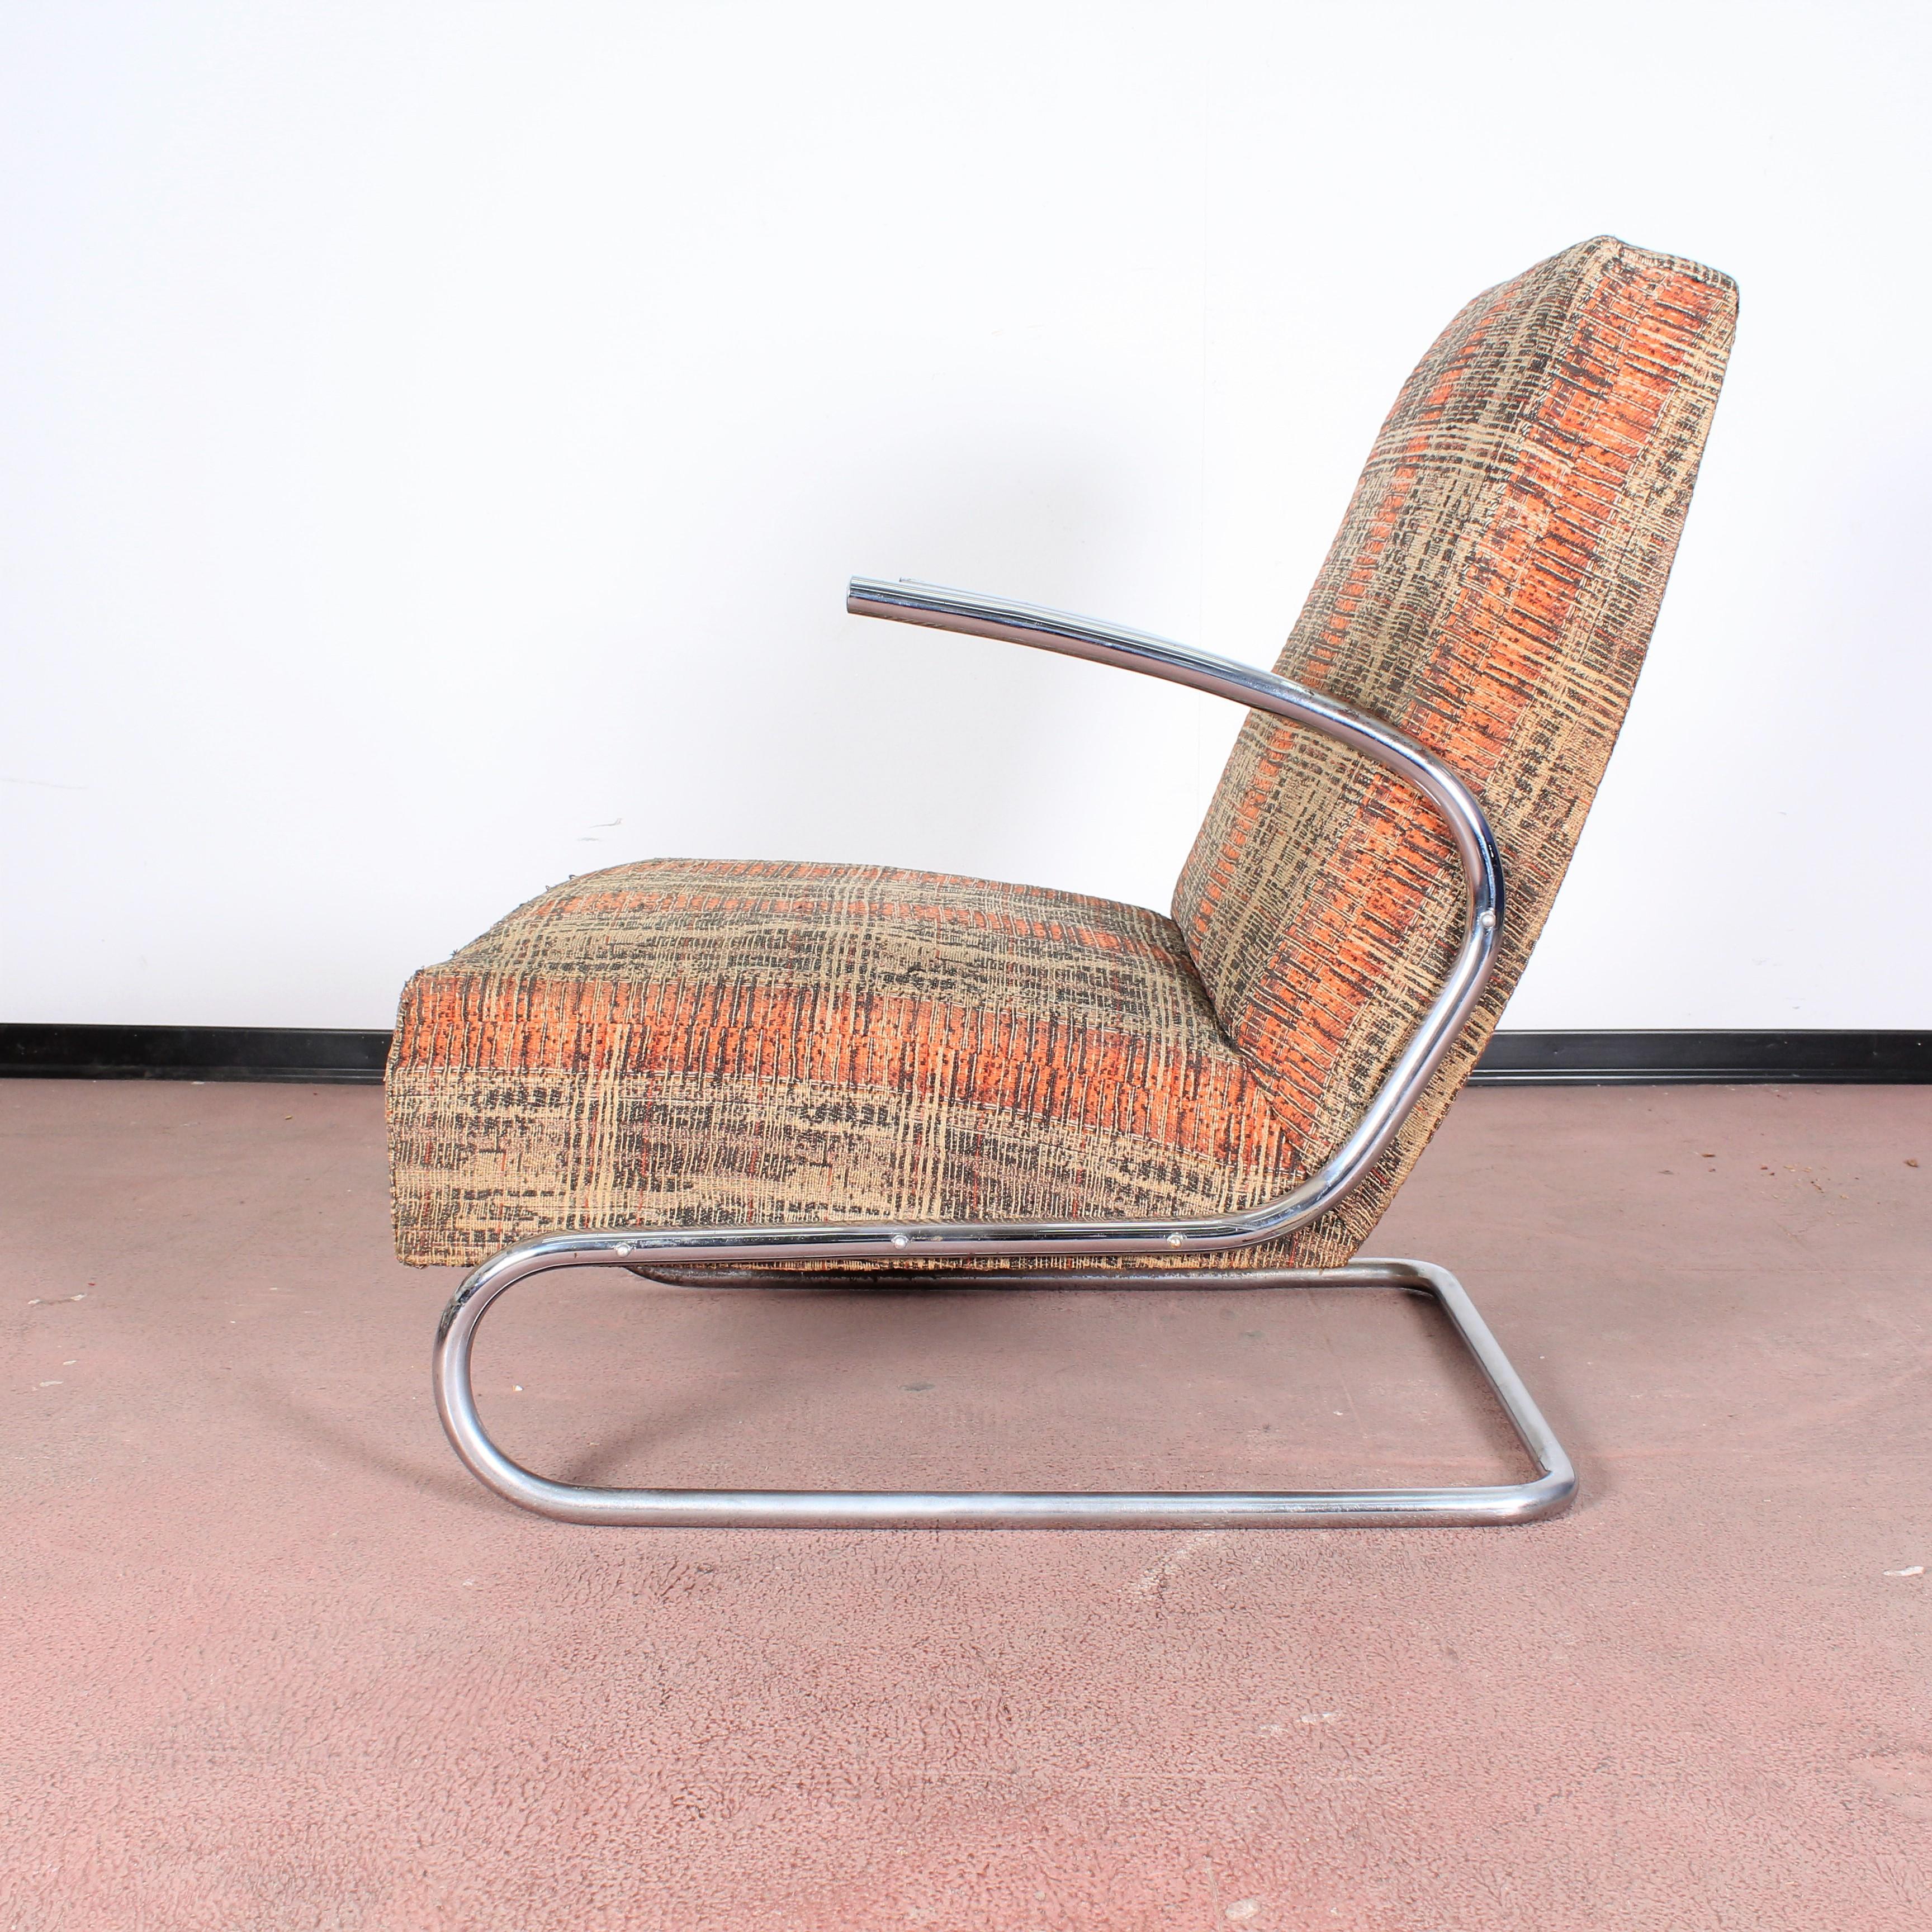 Rare and elegant rationalist tubular steel chair designed in 1930 attributed to Thonet, produced in the Bauhaus period in Germany.
Wear consistent with age and use.